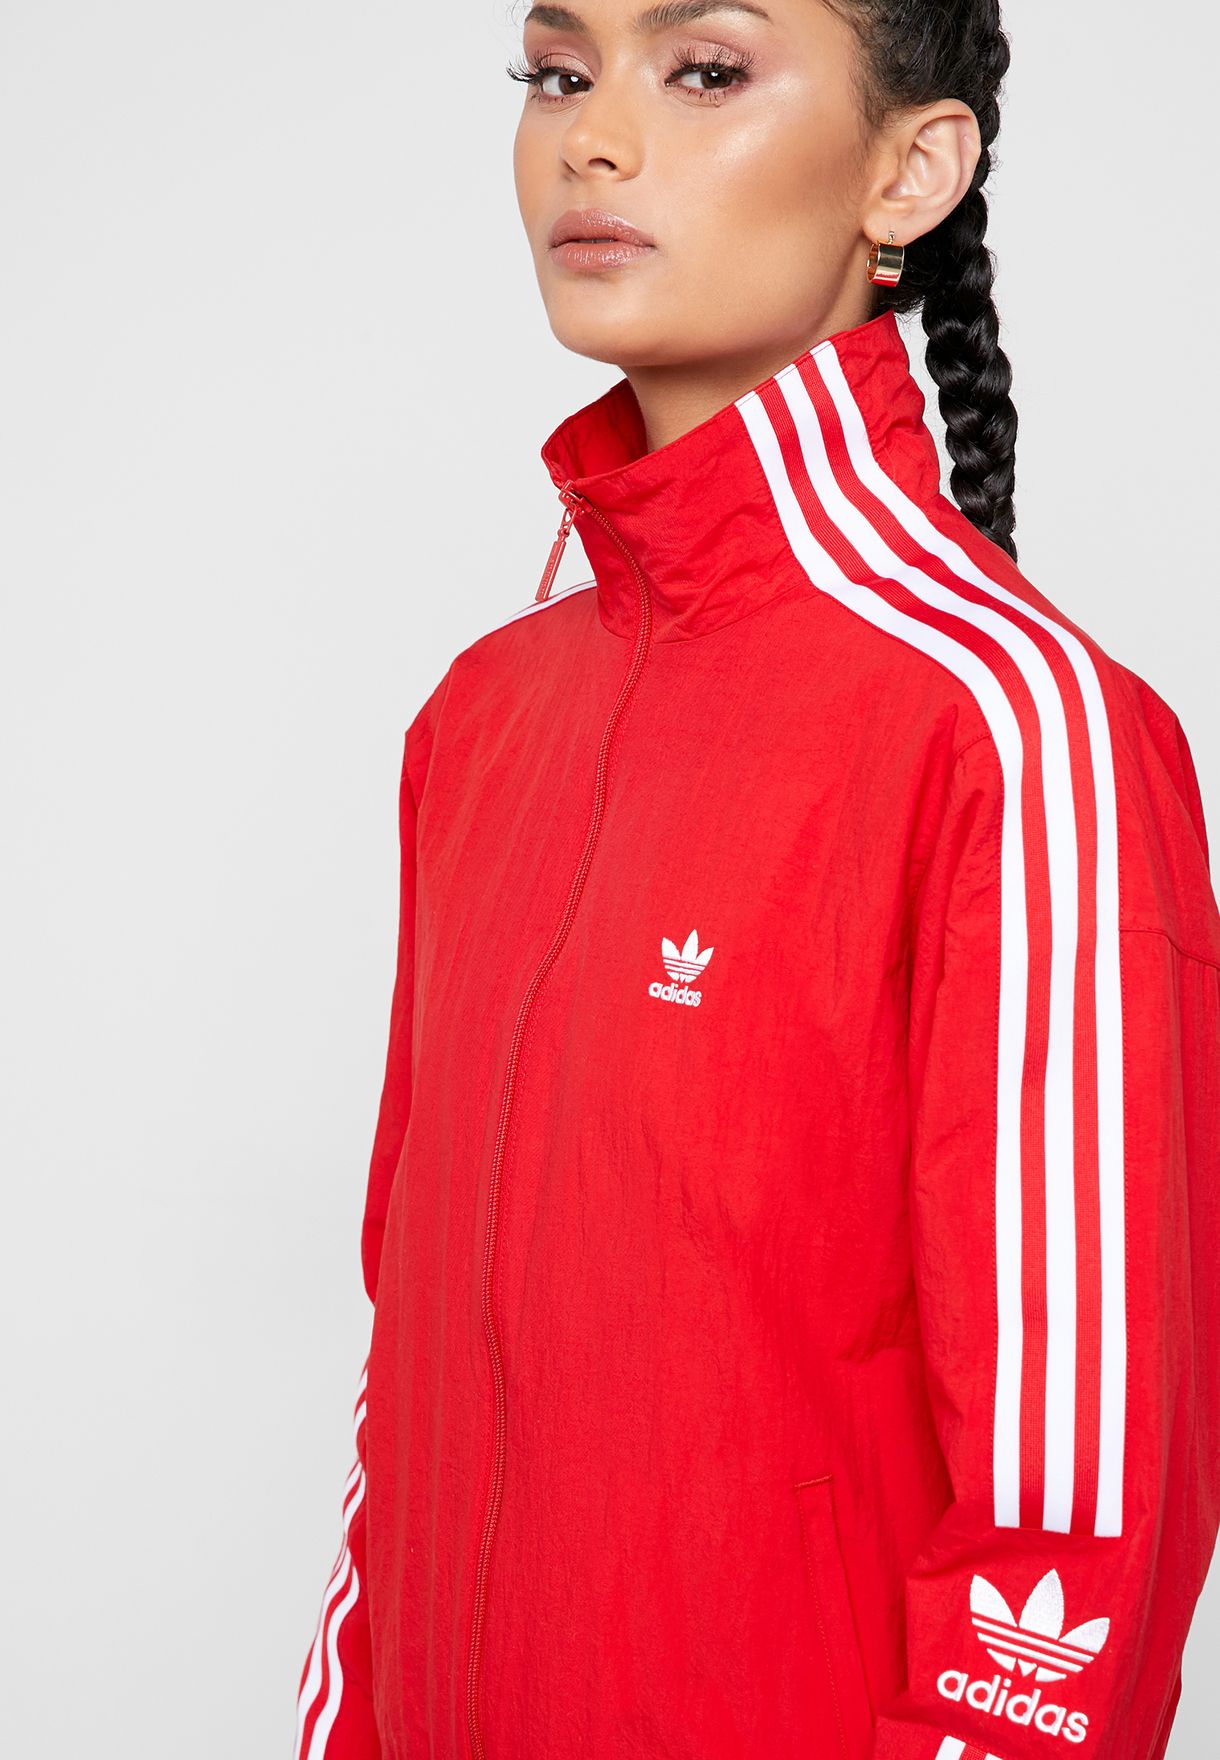 all red adidas jacket